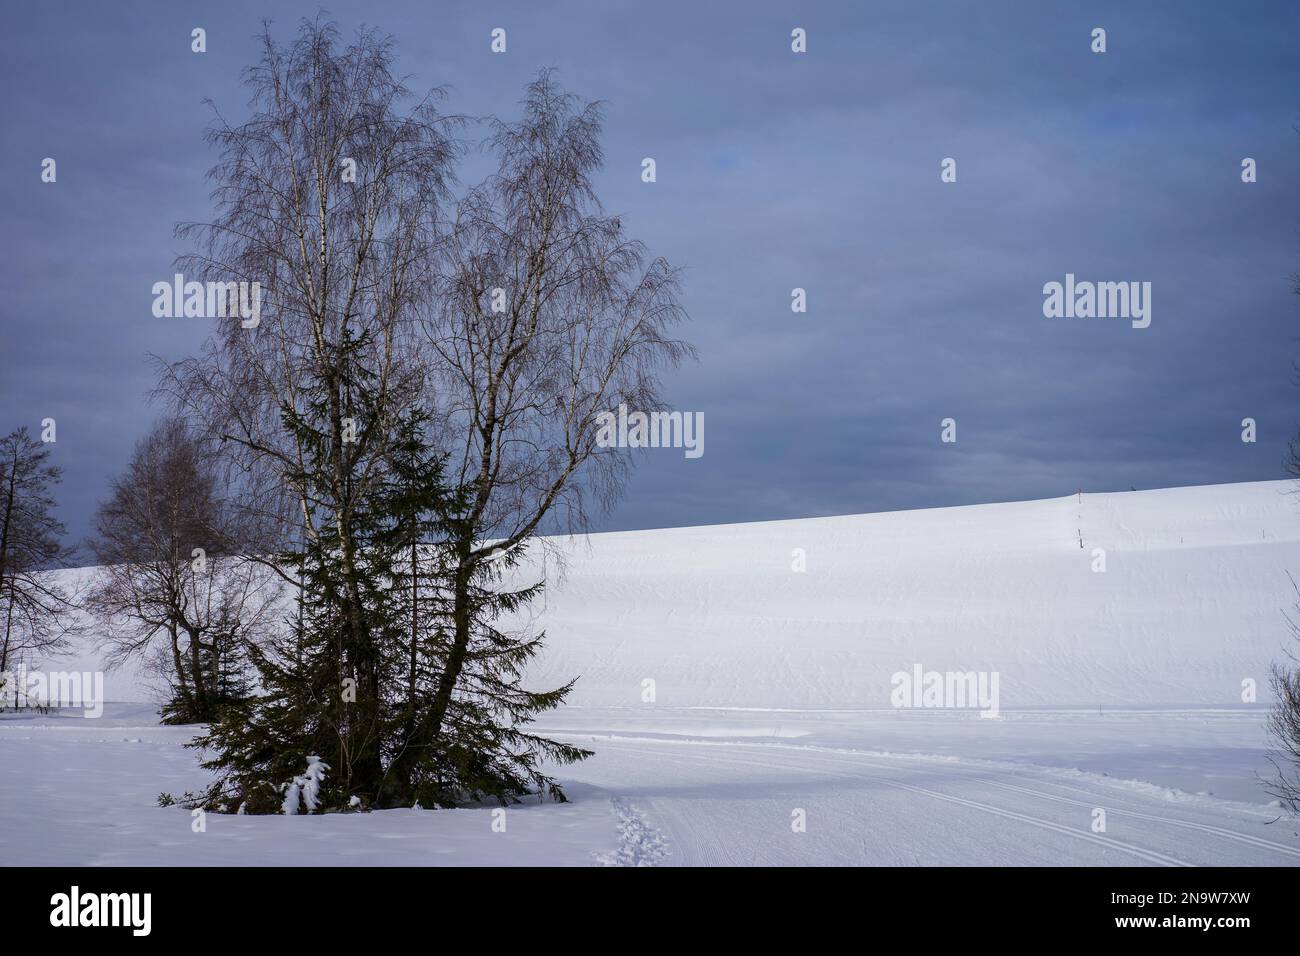 Winter landscape with trees and a snowfield towards blue horizon Stock Photo